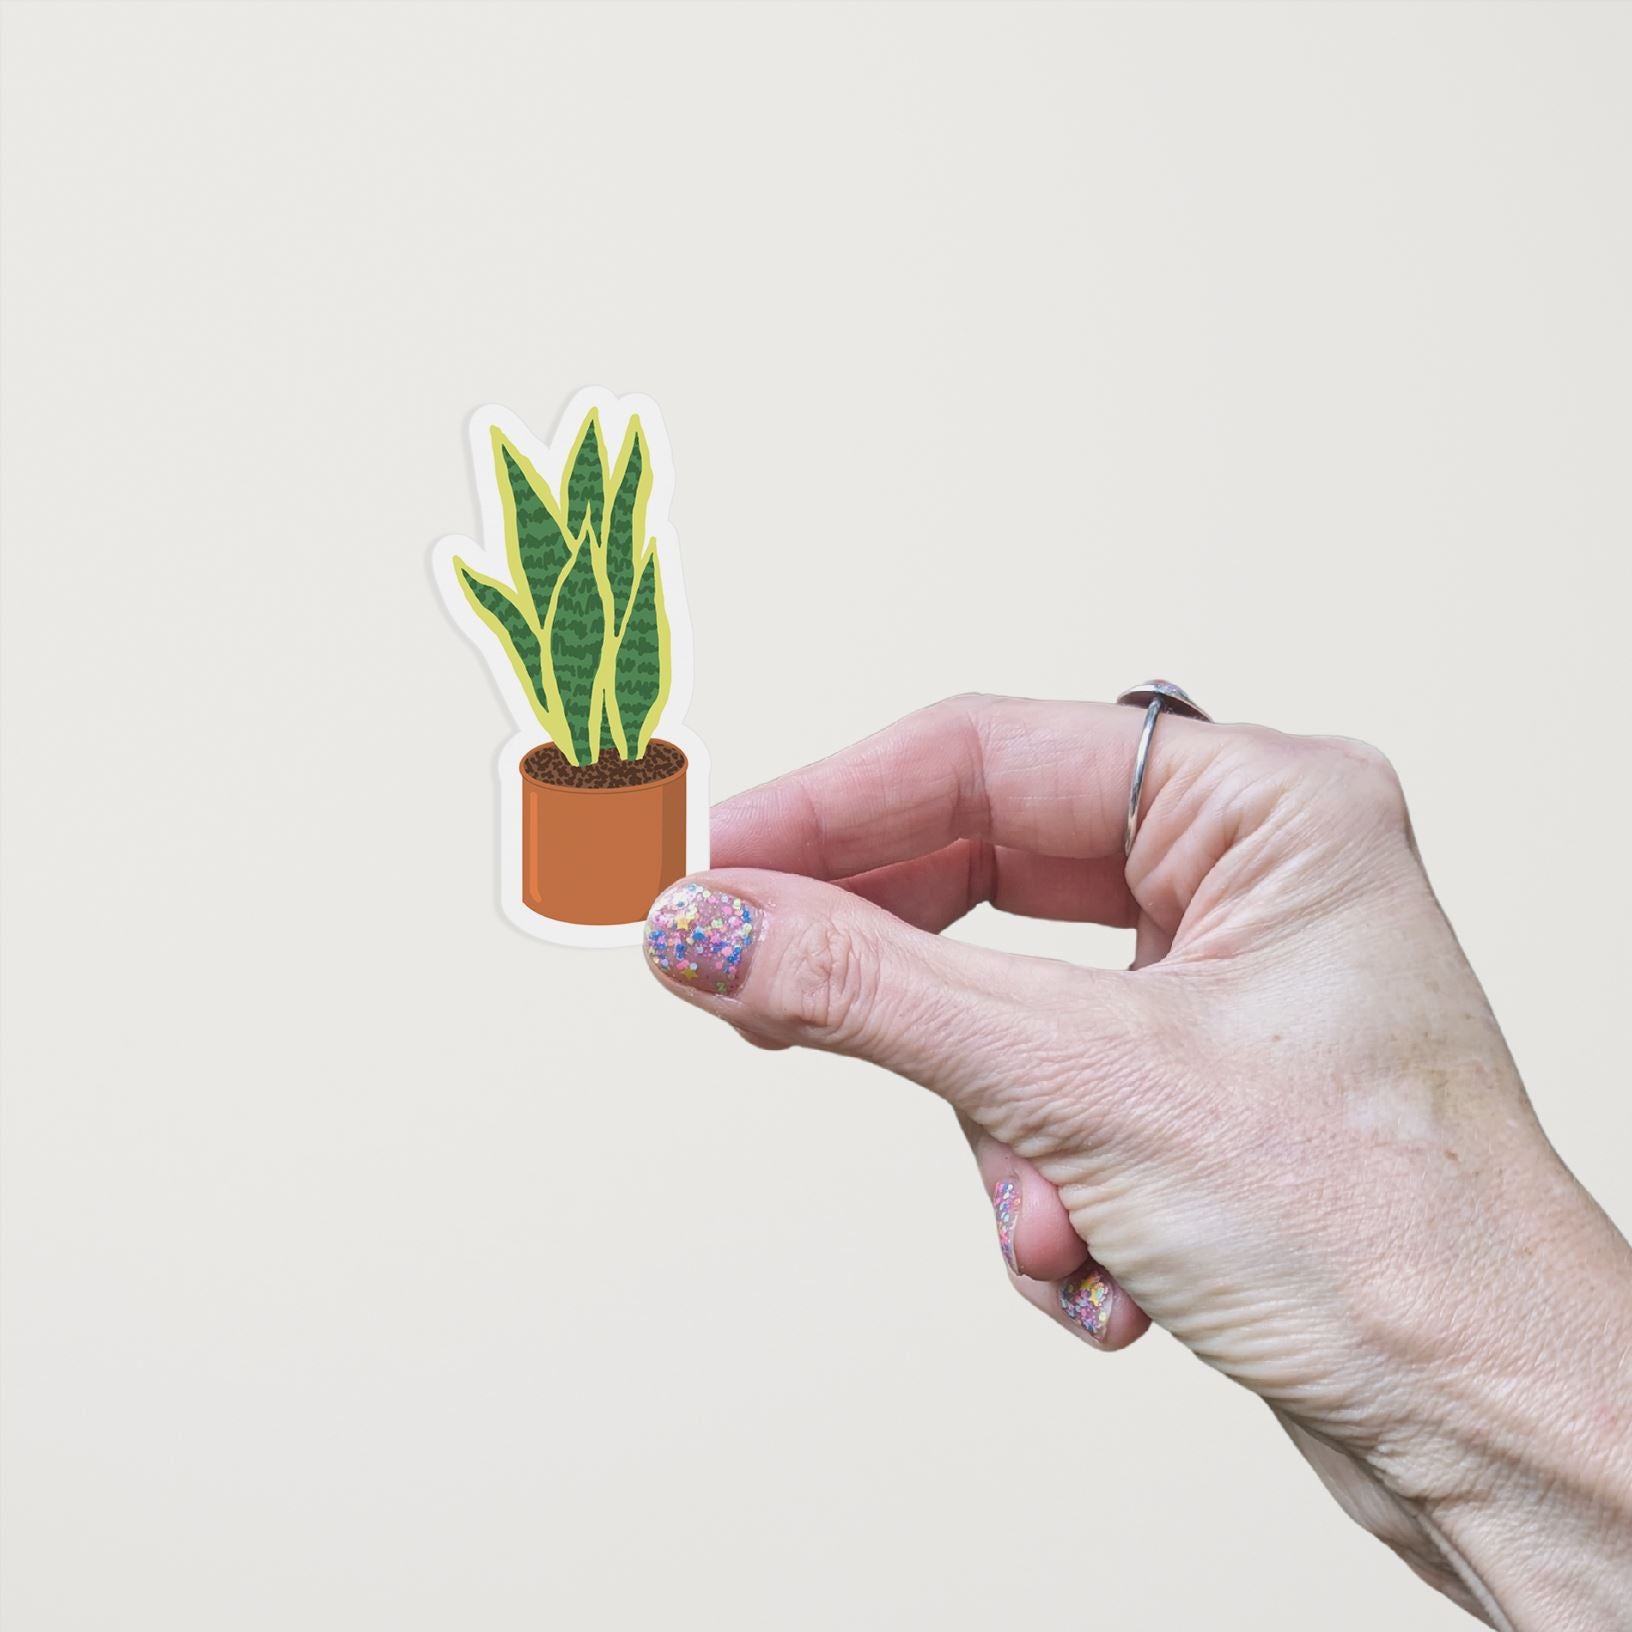 Hand holding a vinyl matte sticker with a hand drawn illustration of a green and yellow snake plant in an orange terracotta pot against a white background.